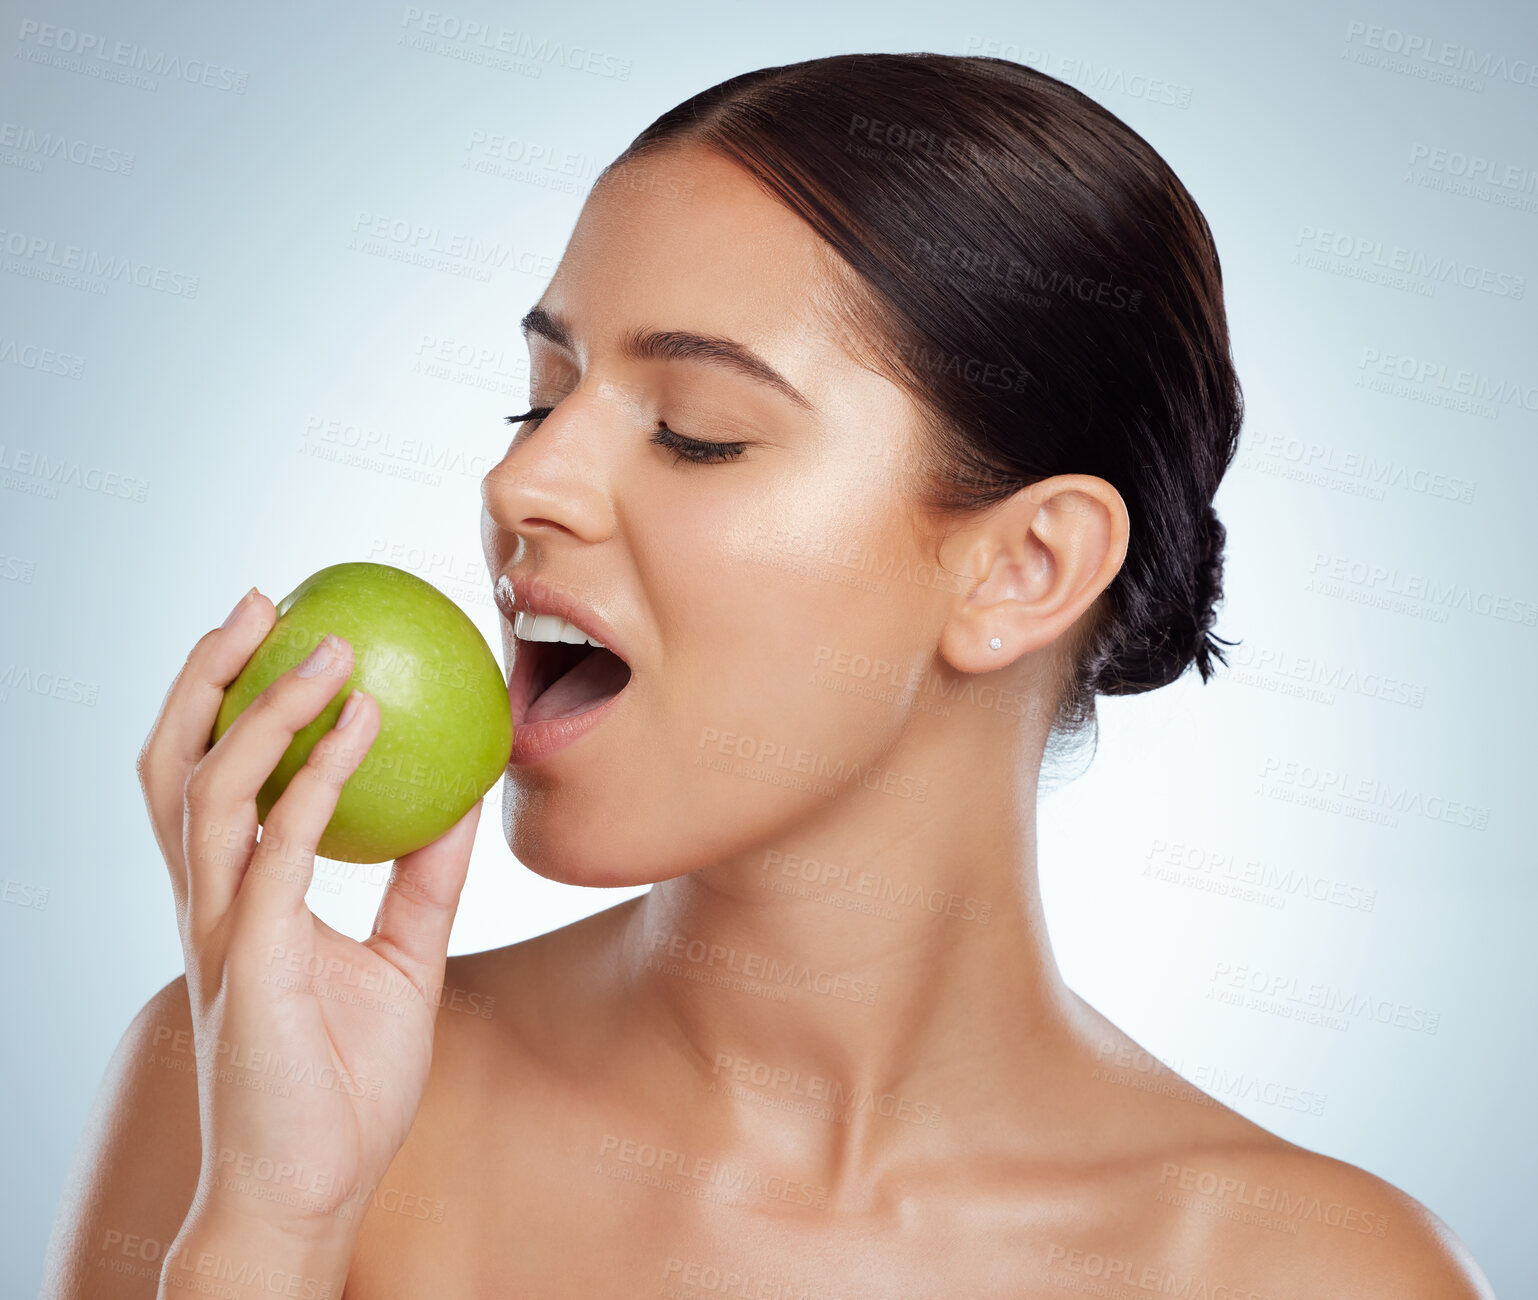 Buy stock photo Beautiful woman biting into a green apple while posing with copyspace. Caucasian model isolated against a grey background in a studio. Eating healthy and dieting is part of a good skincare routine